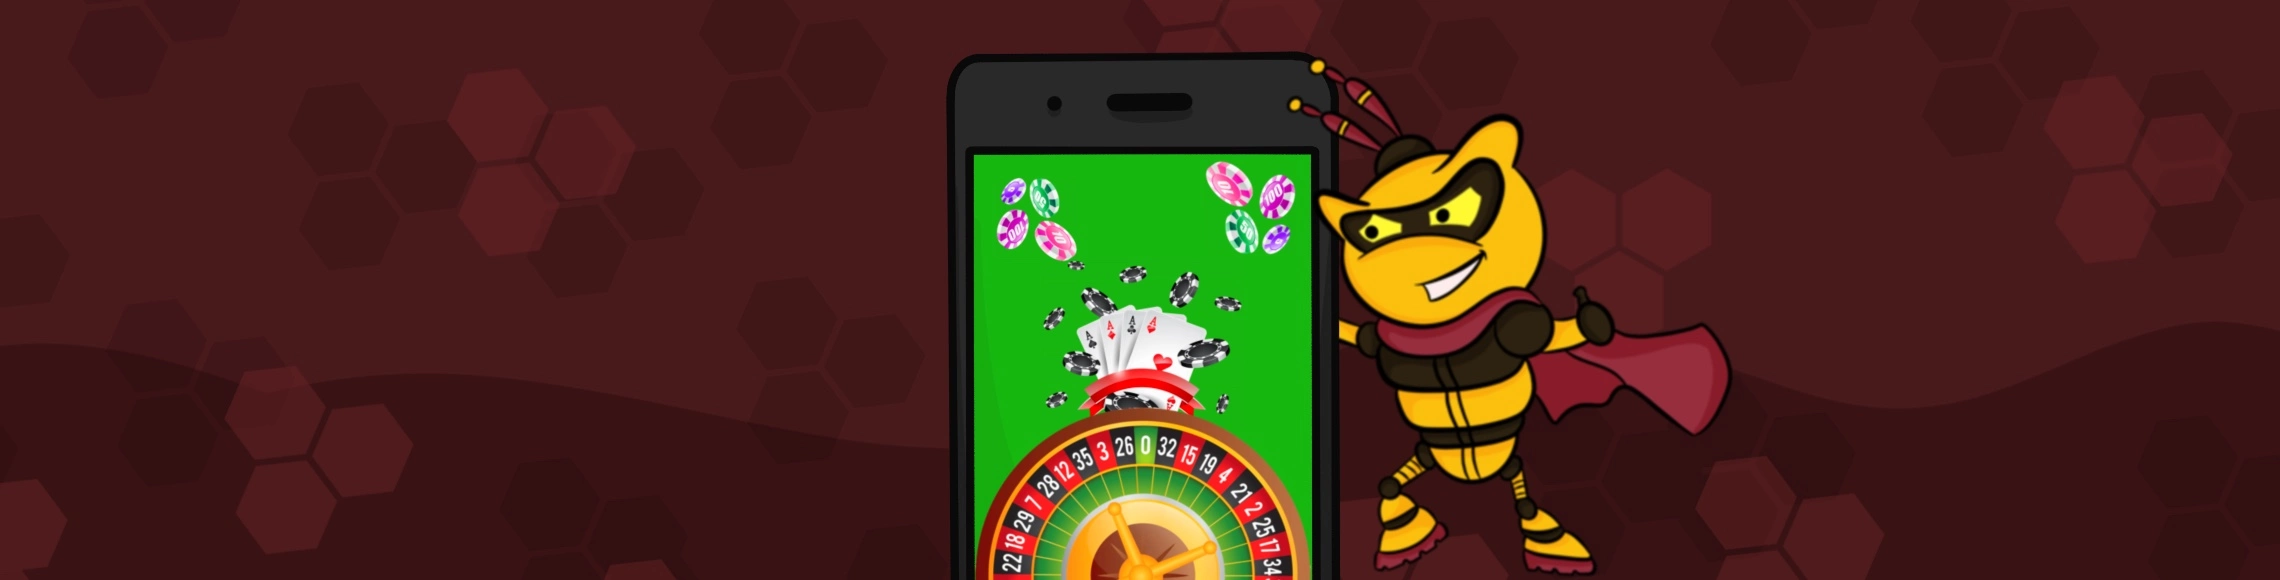 casinos on mobile